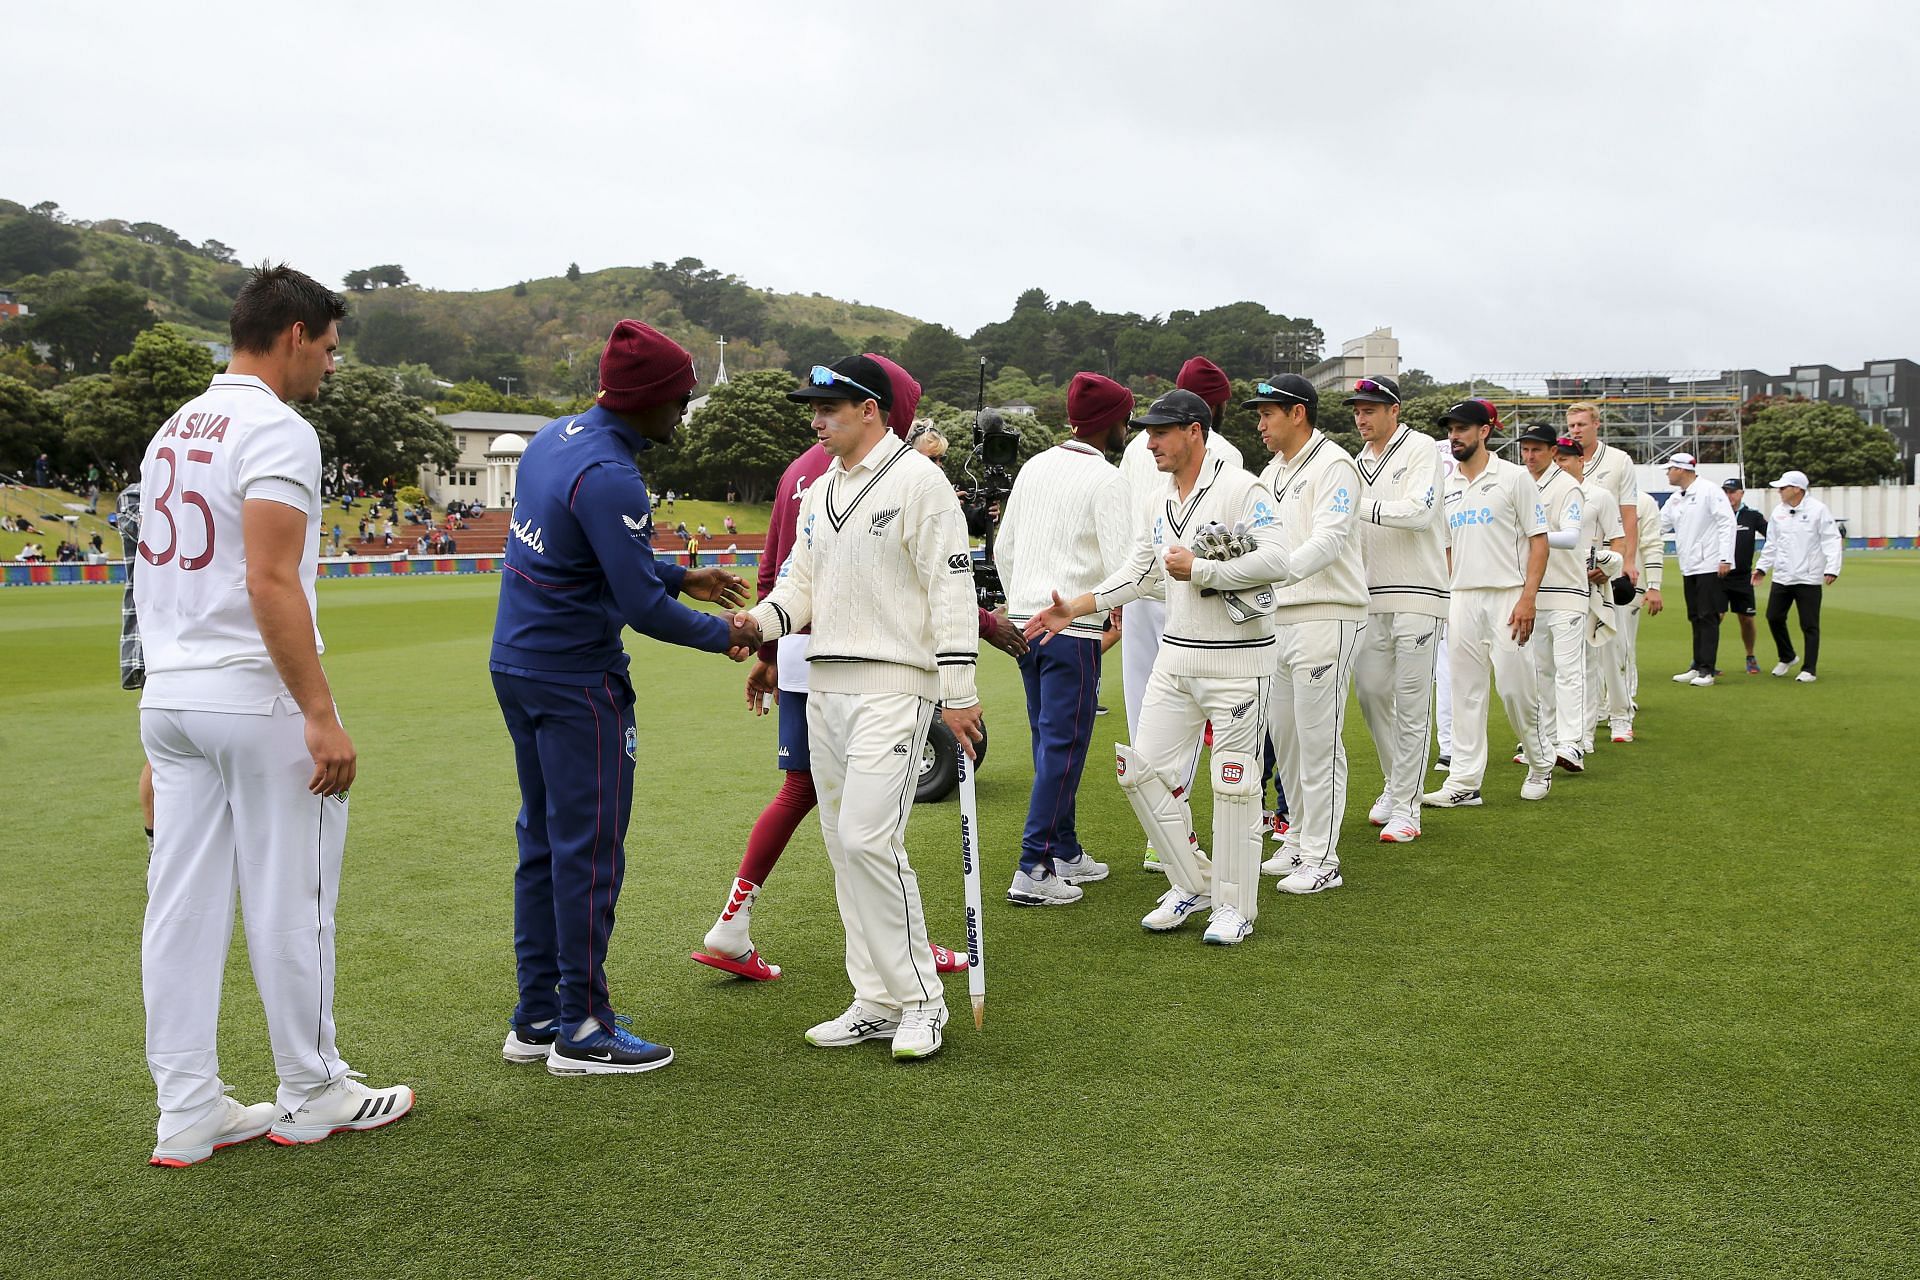 New Zealand v West Indies - 2nd Test: Day 4